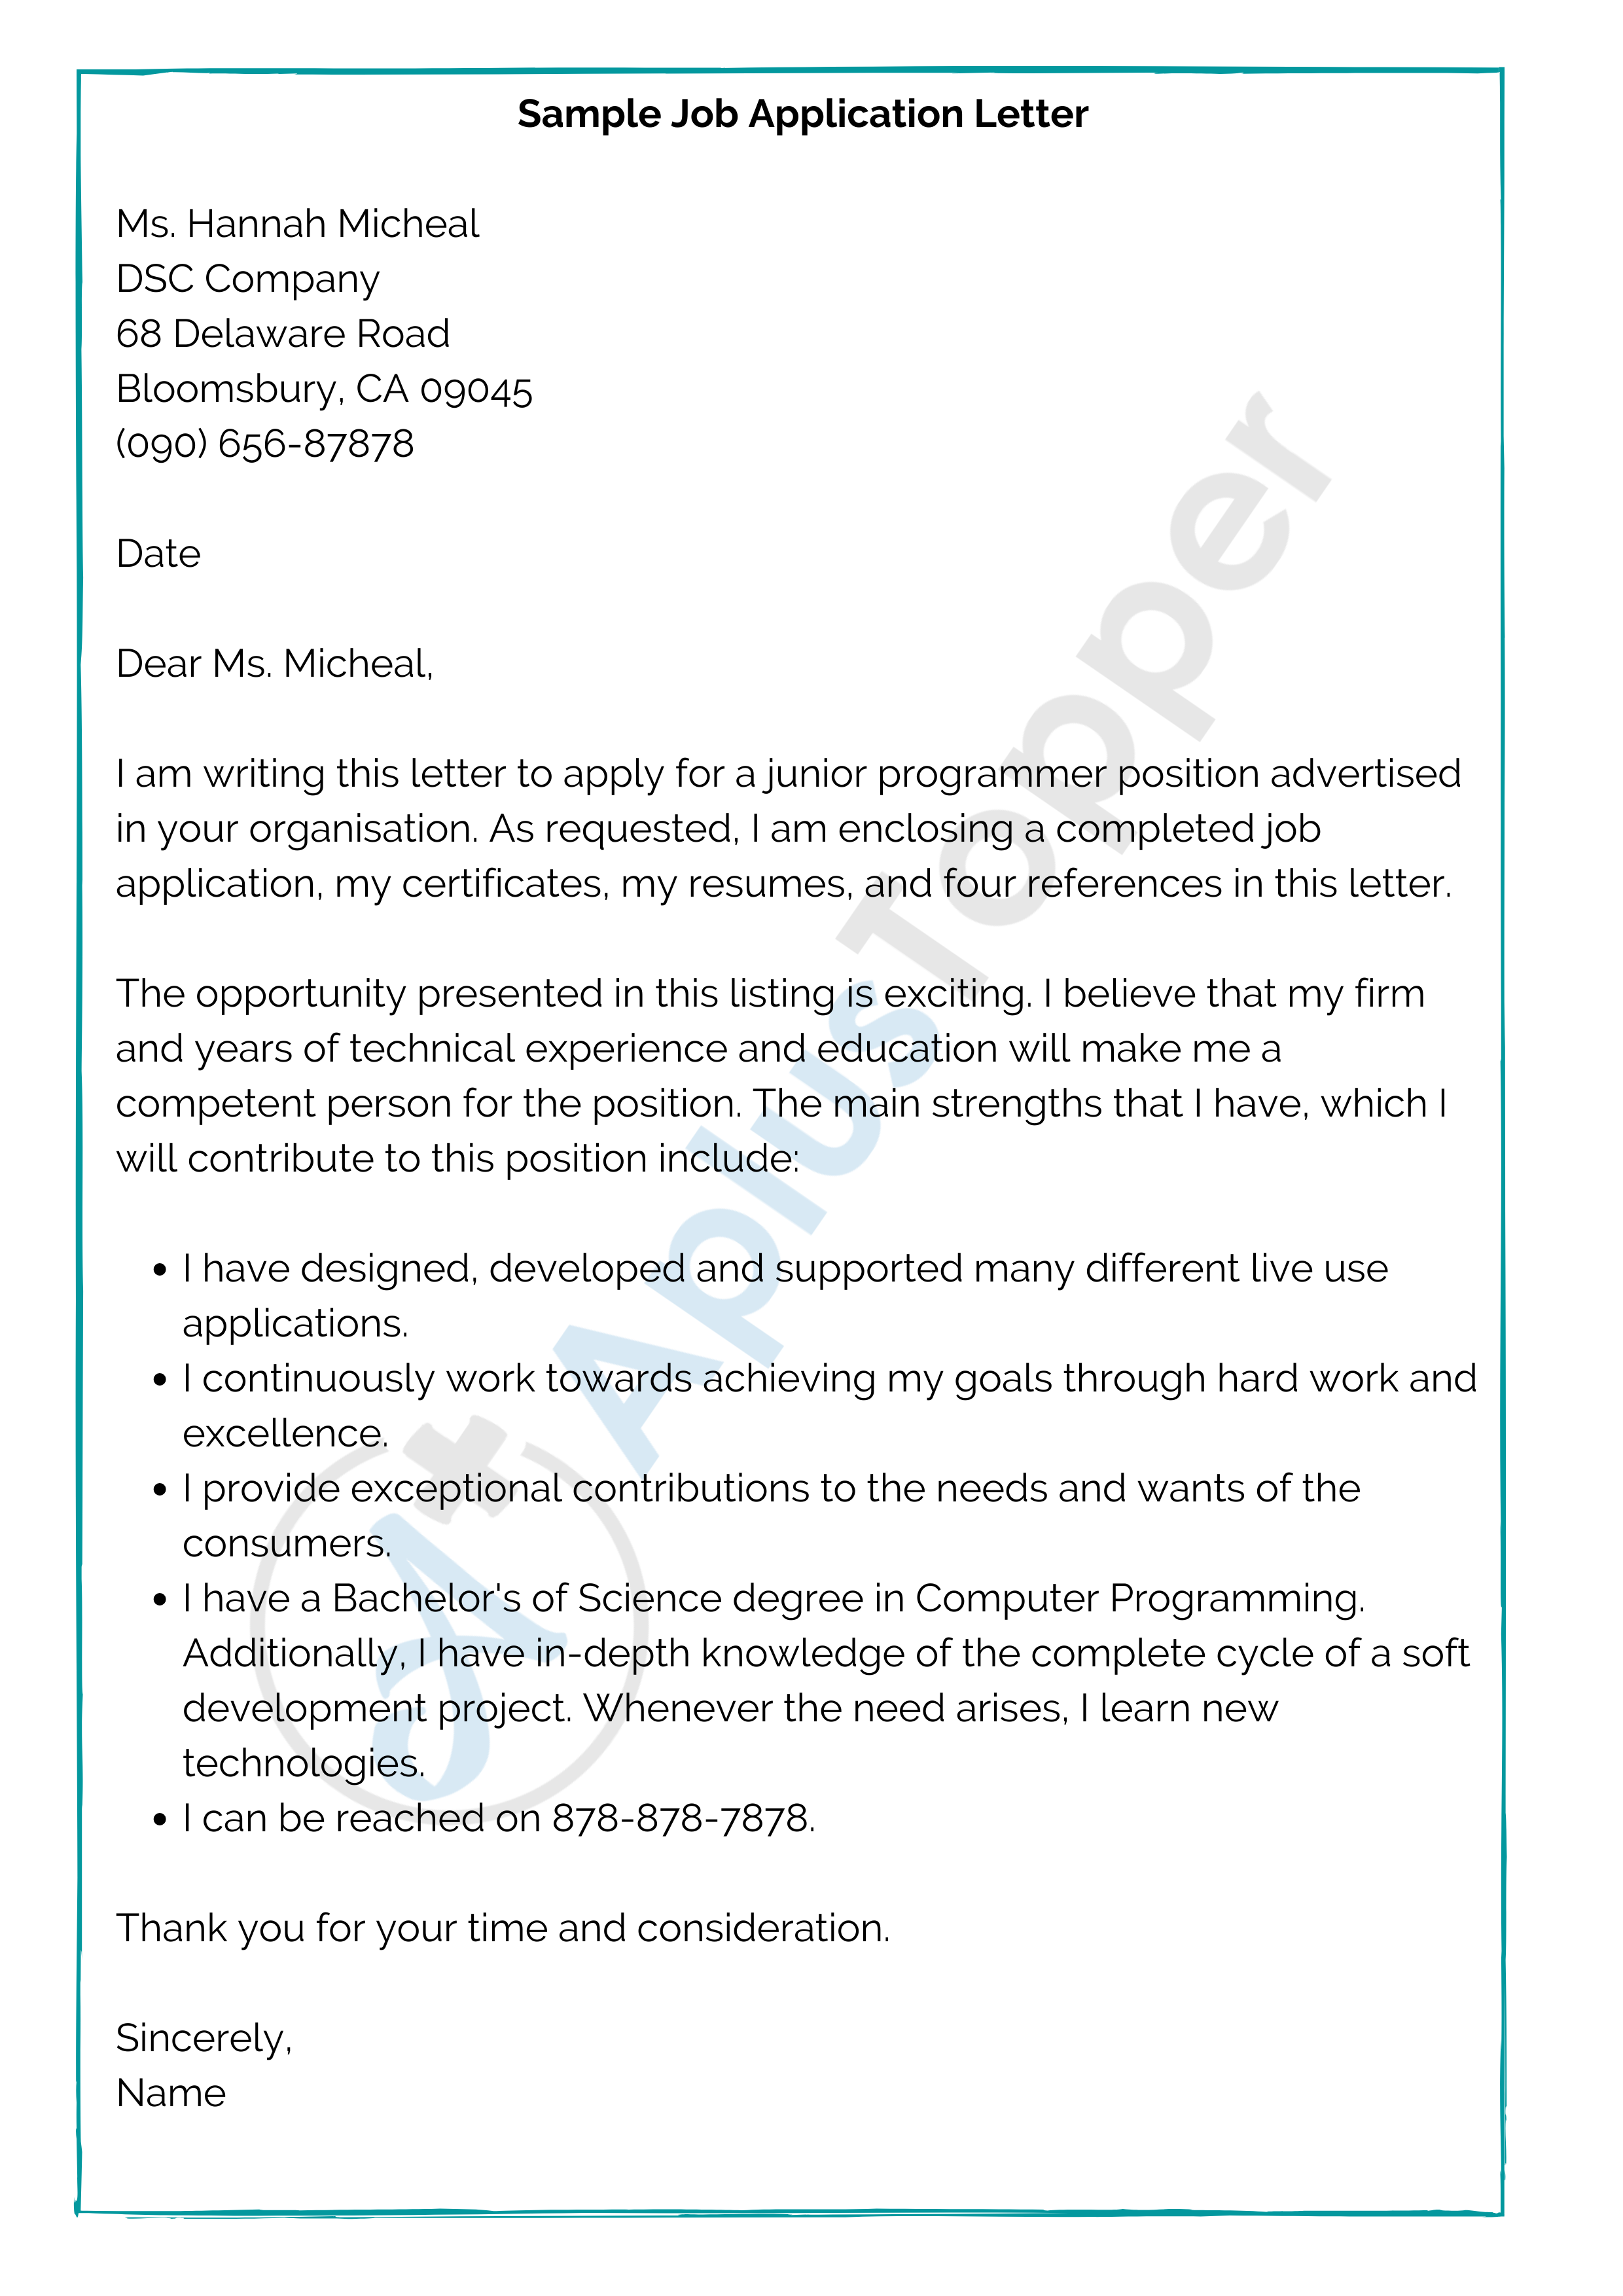 make an application letter (formal style)